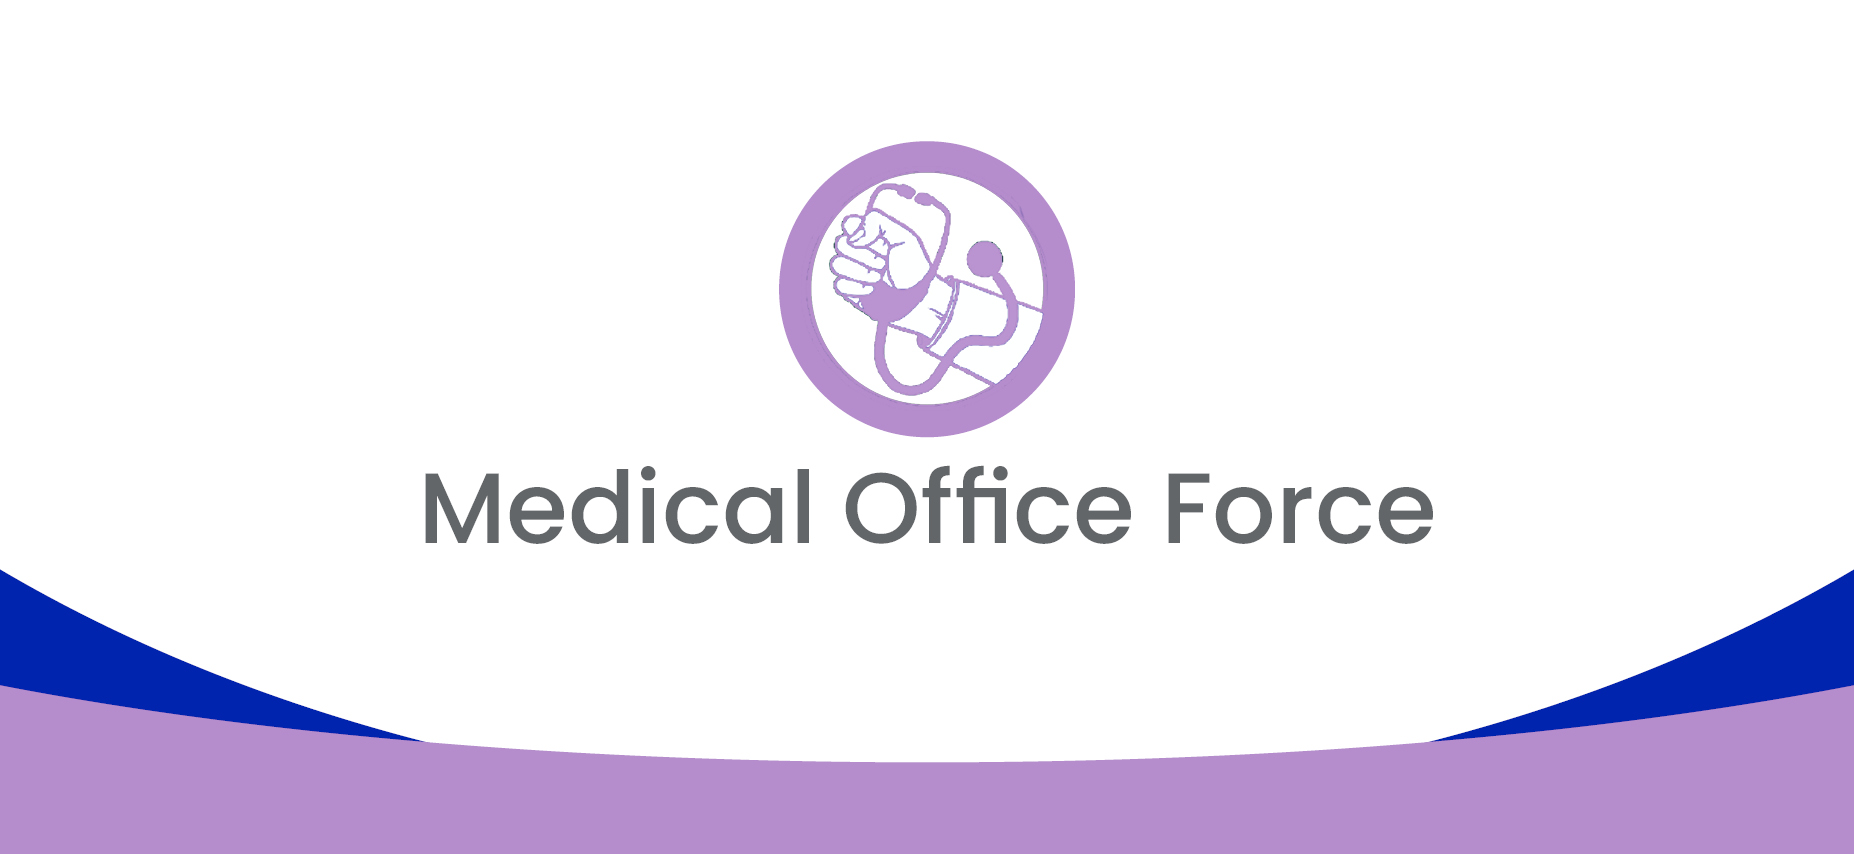 What is Medical Office Force